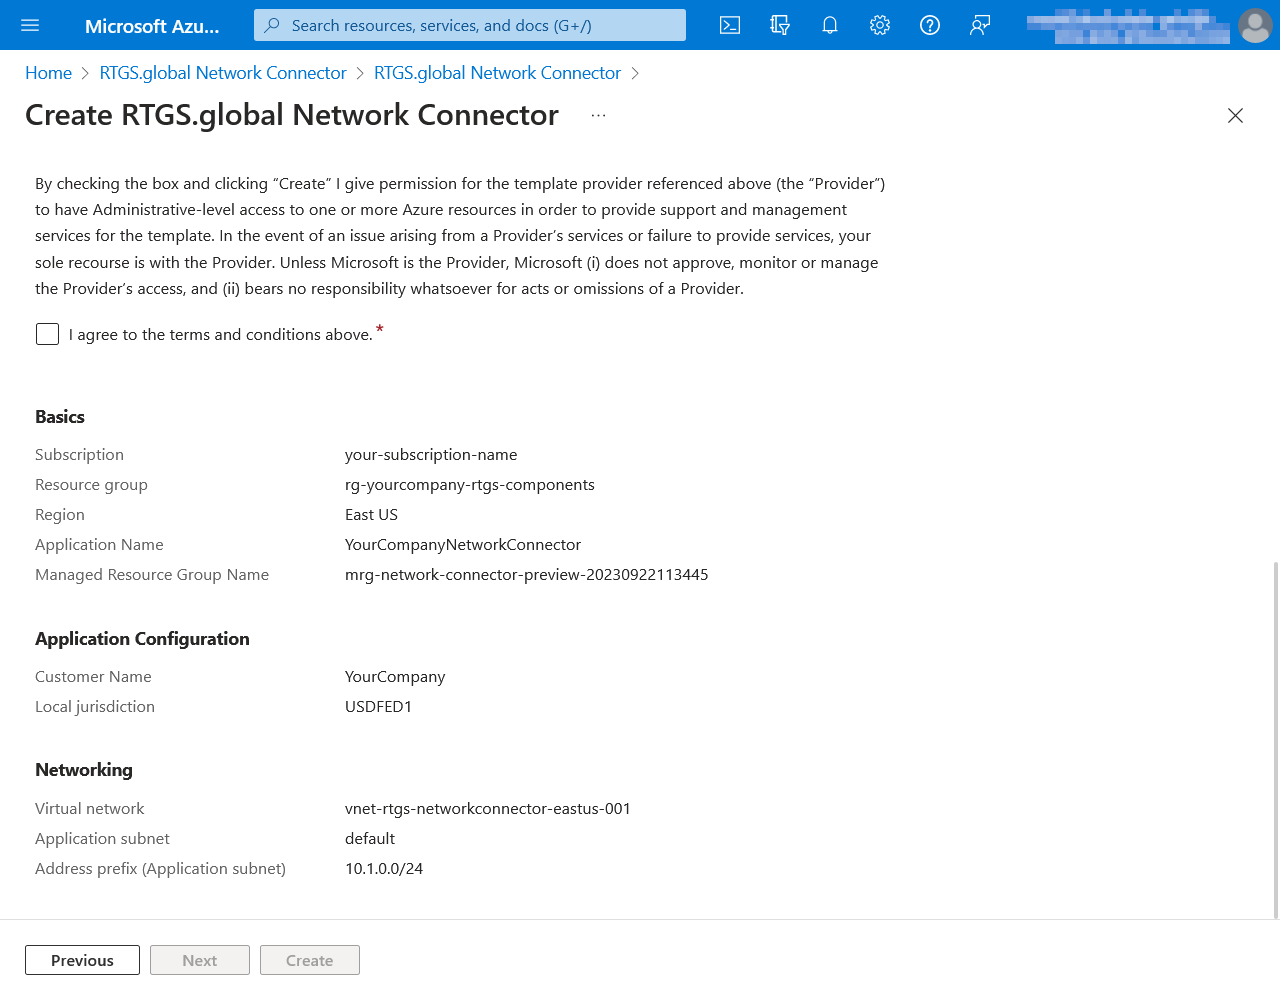 Image showing the sixth step of the RTGS.global Network Connector deployment wizard